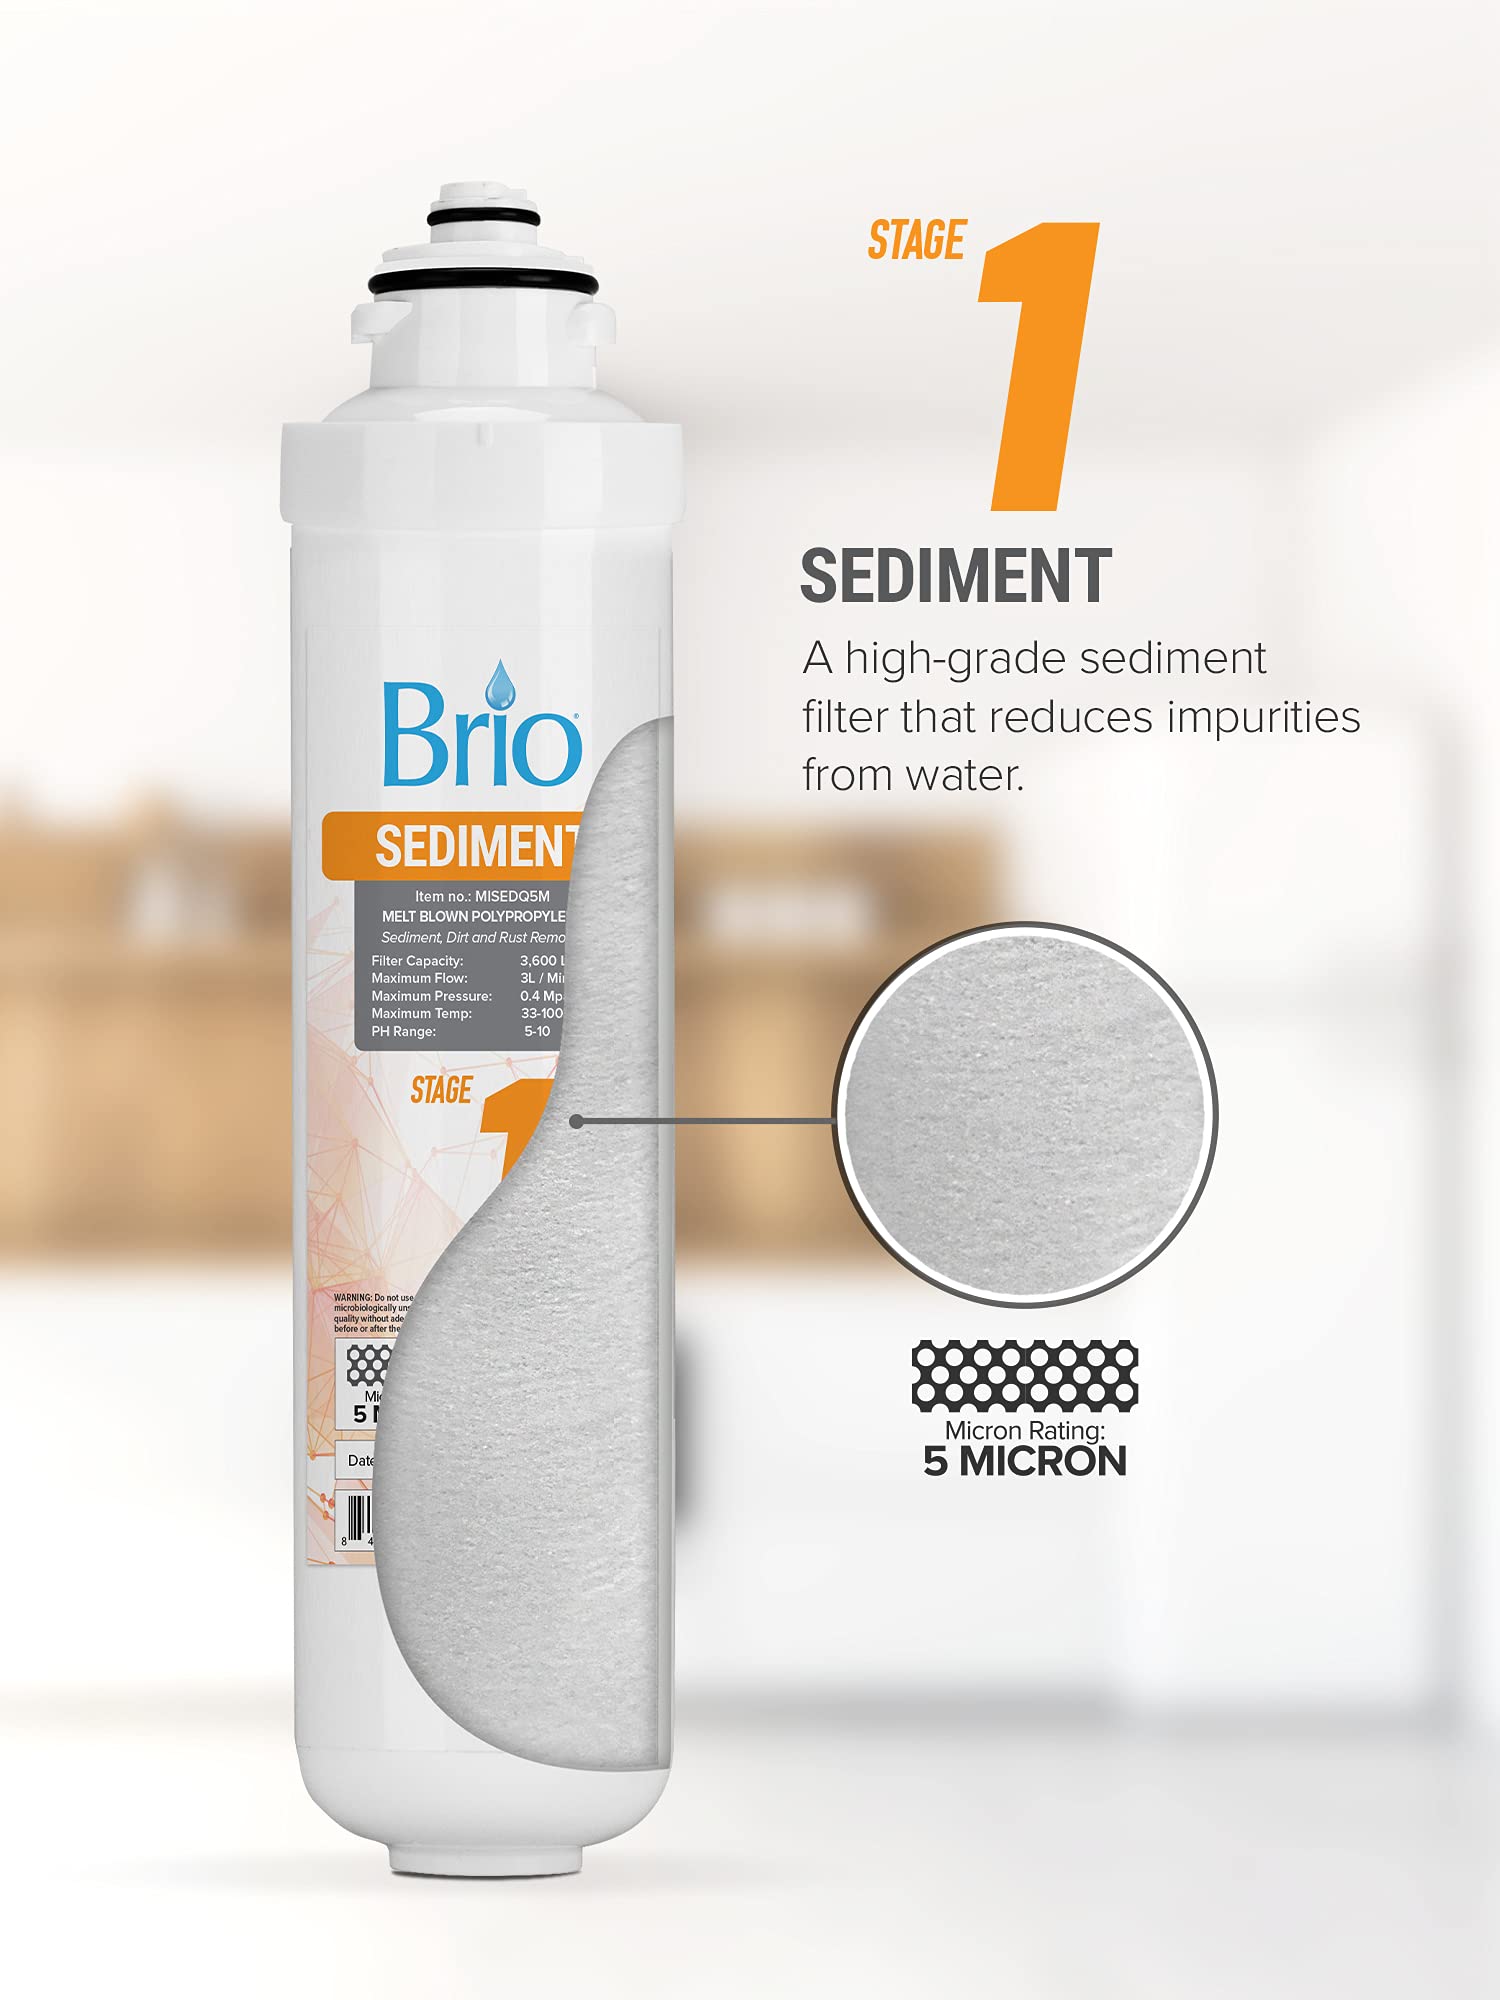 Brio Water Cooler Filter Replacement - Stage-1: Melt-Blown Polypropylene Sediment - for Brio model CLPOUROSC420RO